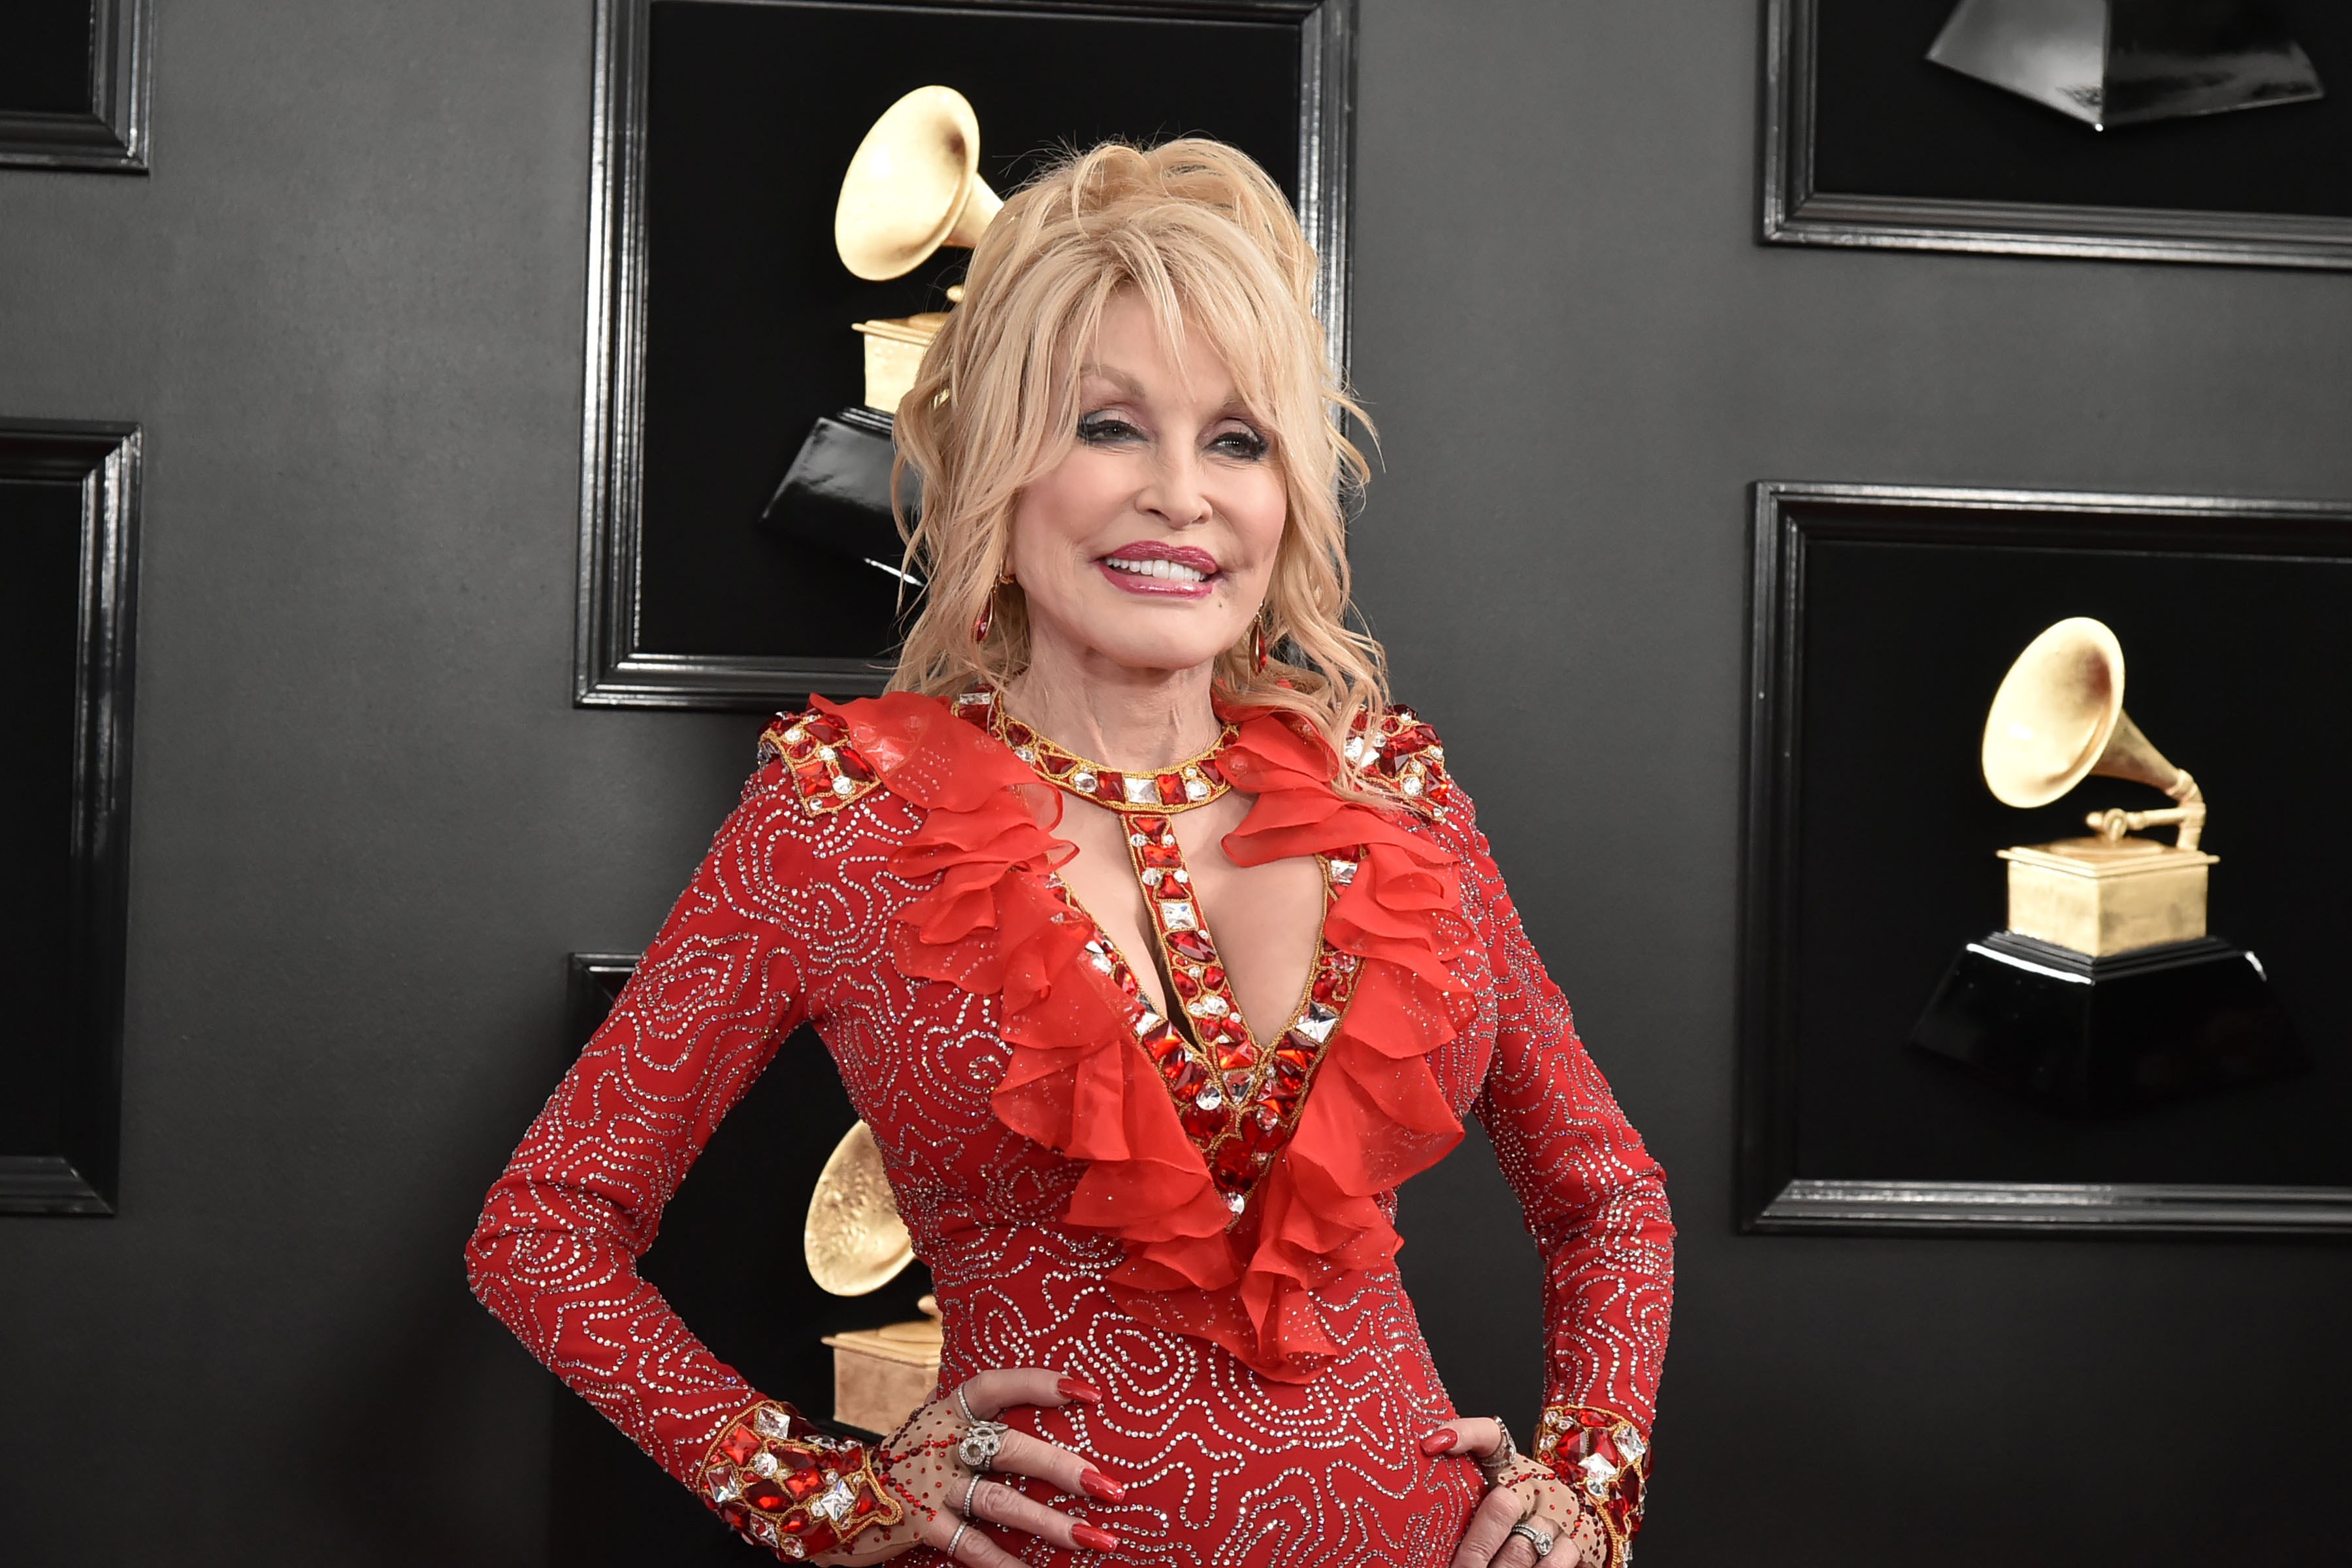 Dolly Parton poses on the carpet in a red dress at the Grammy Awards